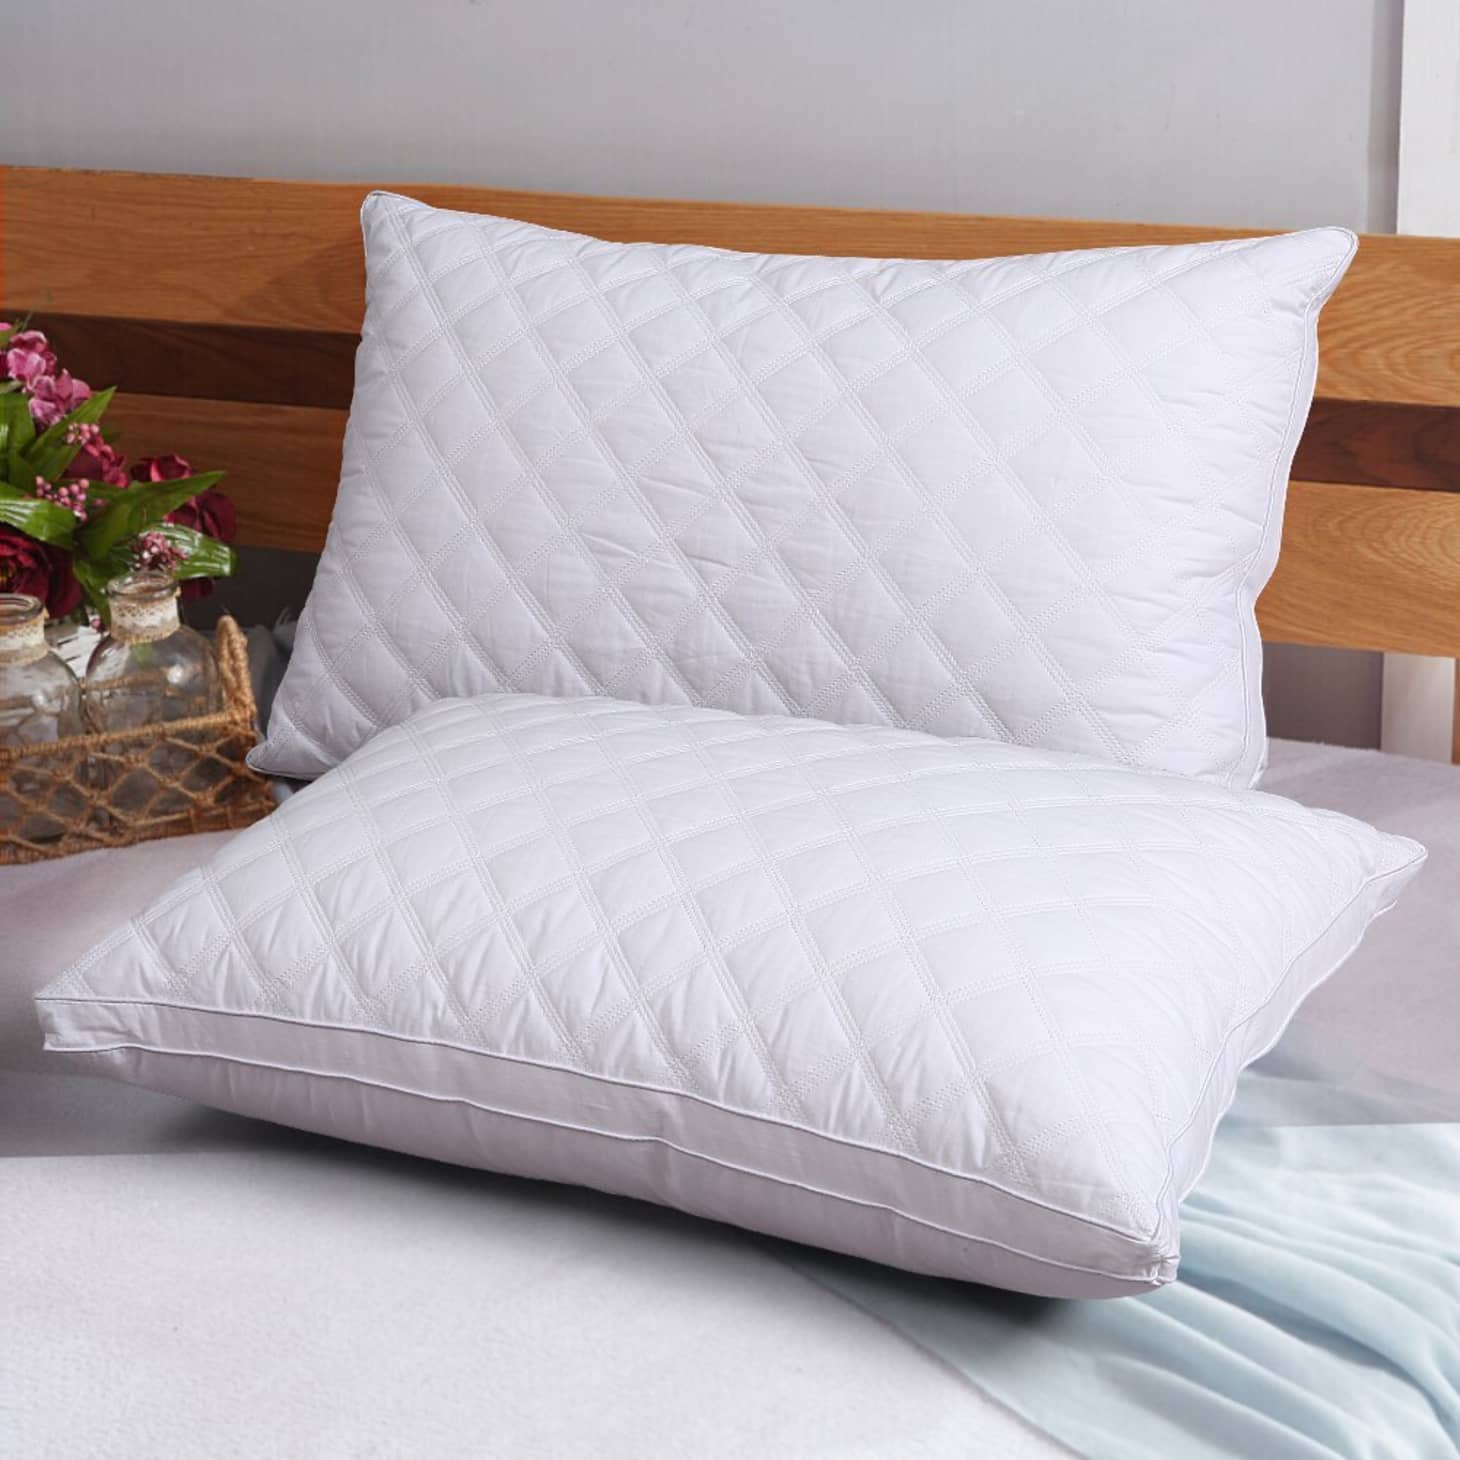 5 TopRated Bed Pillows On Sale at Amazon Apartment Therapy